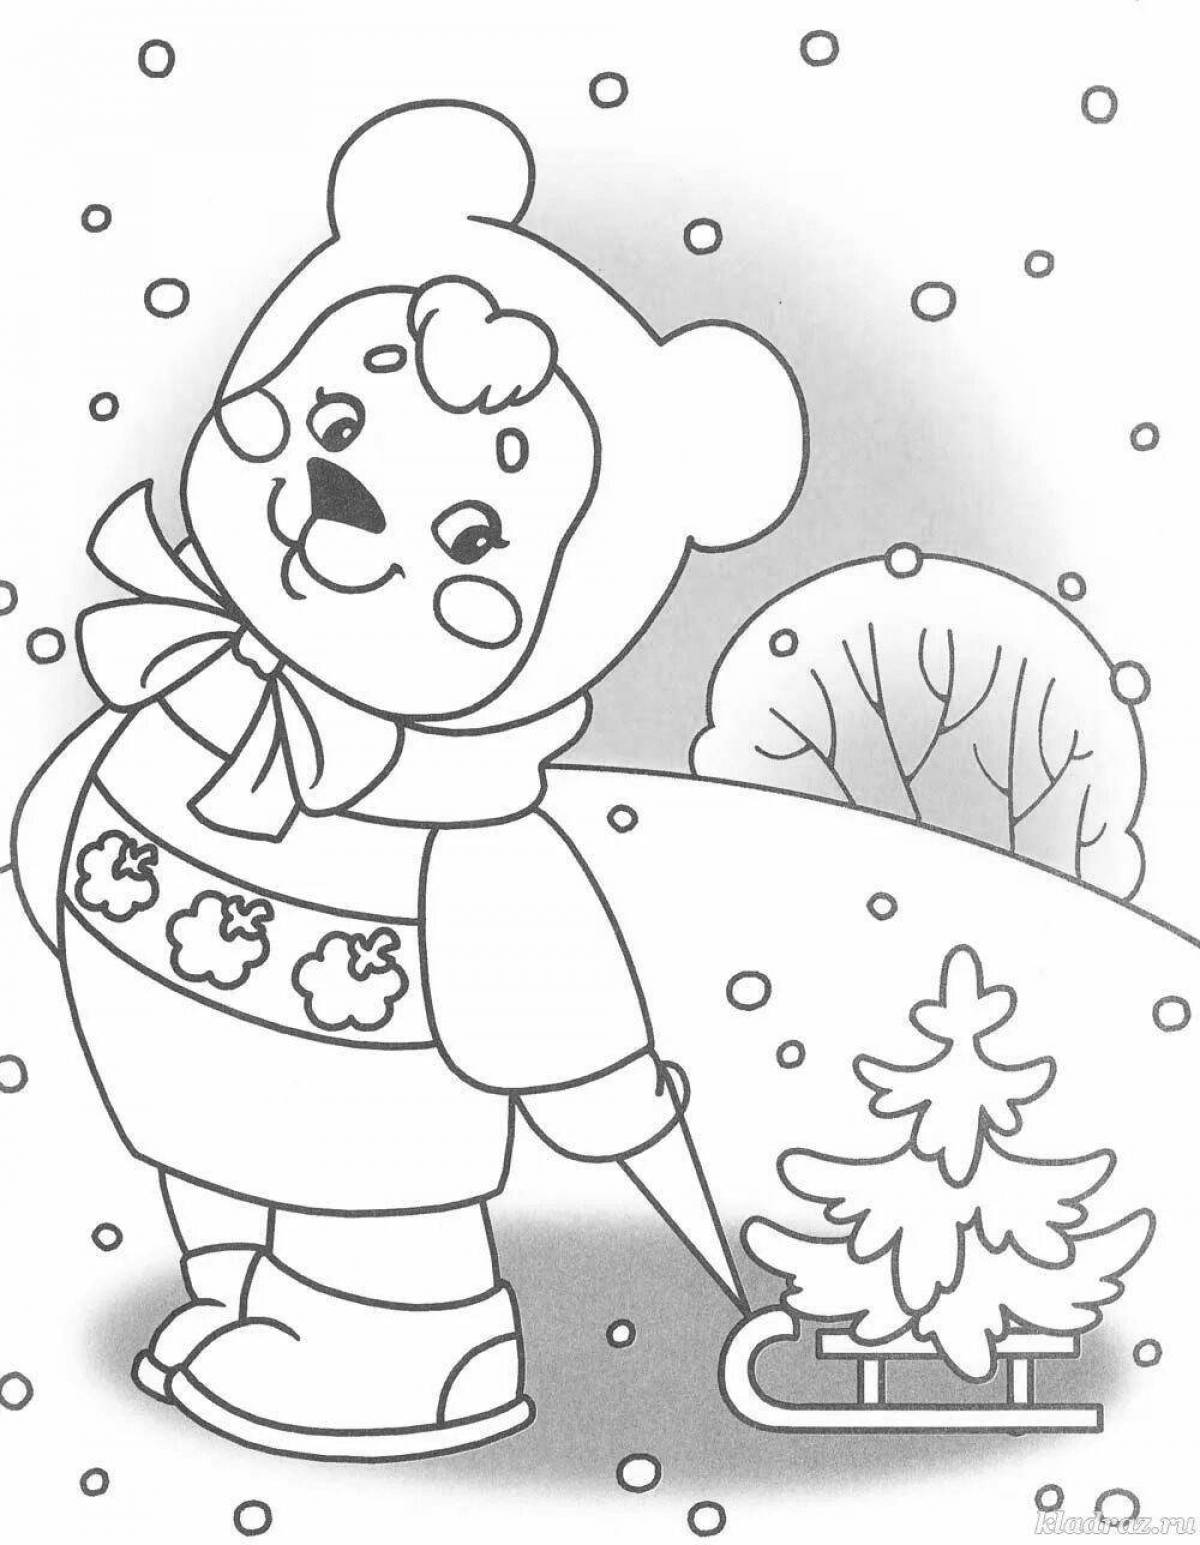 Fun winter coloring for the younger group